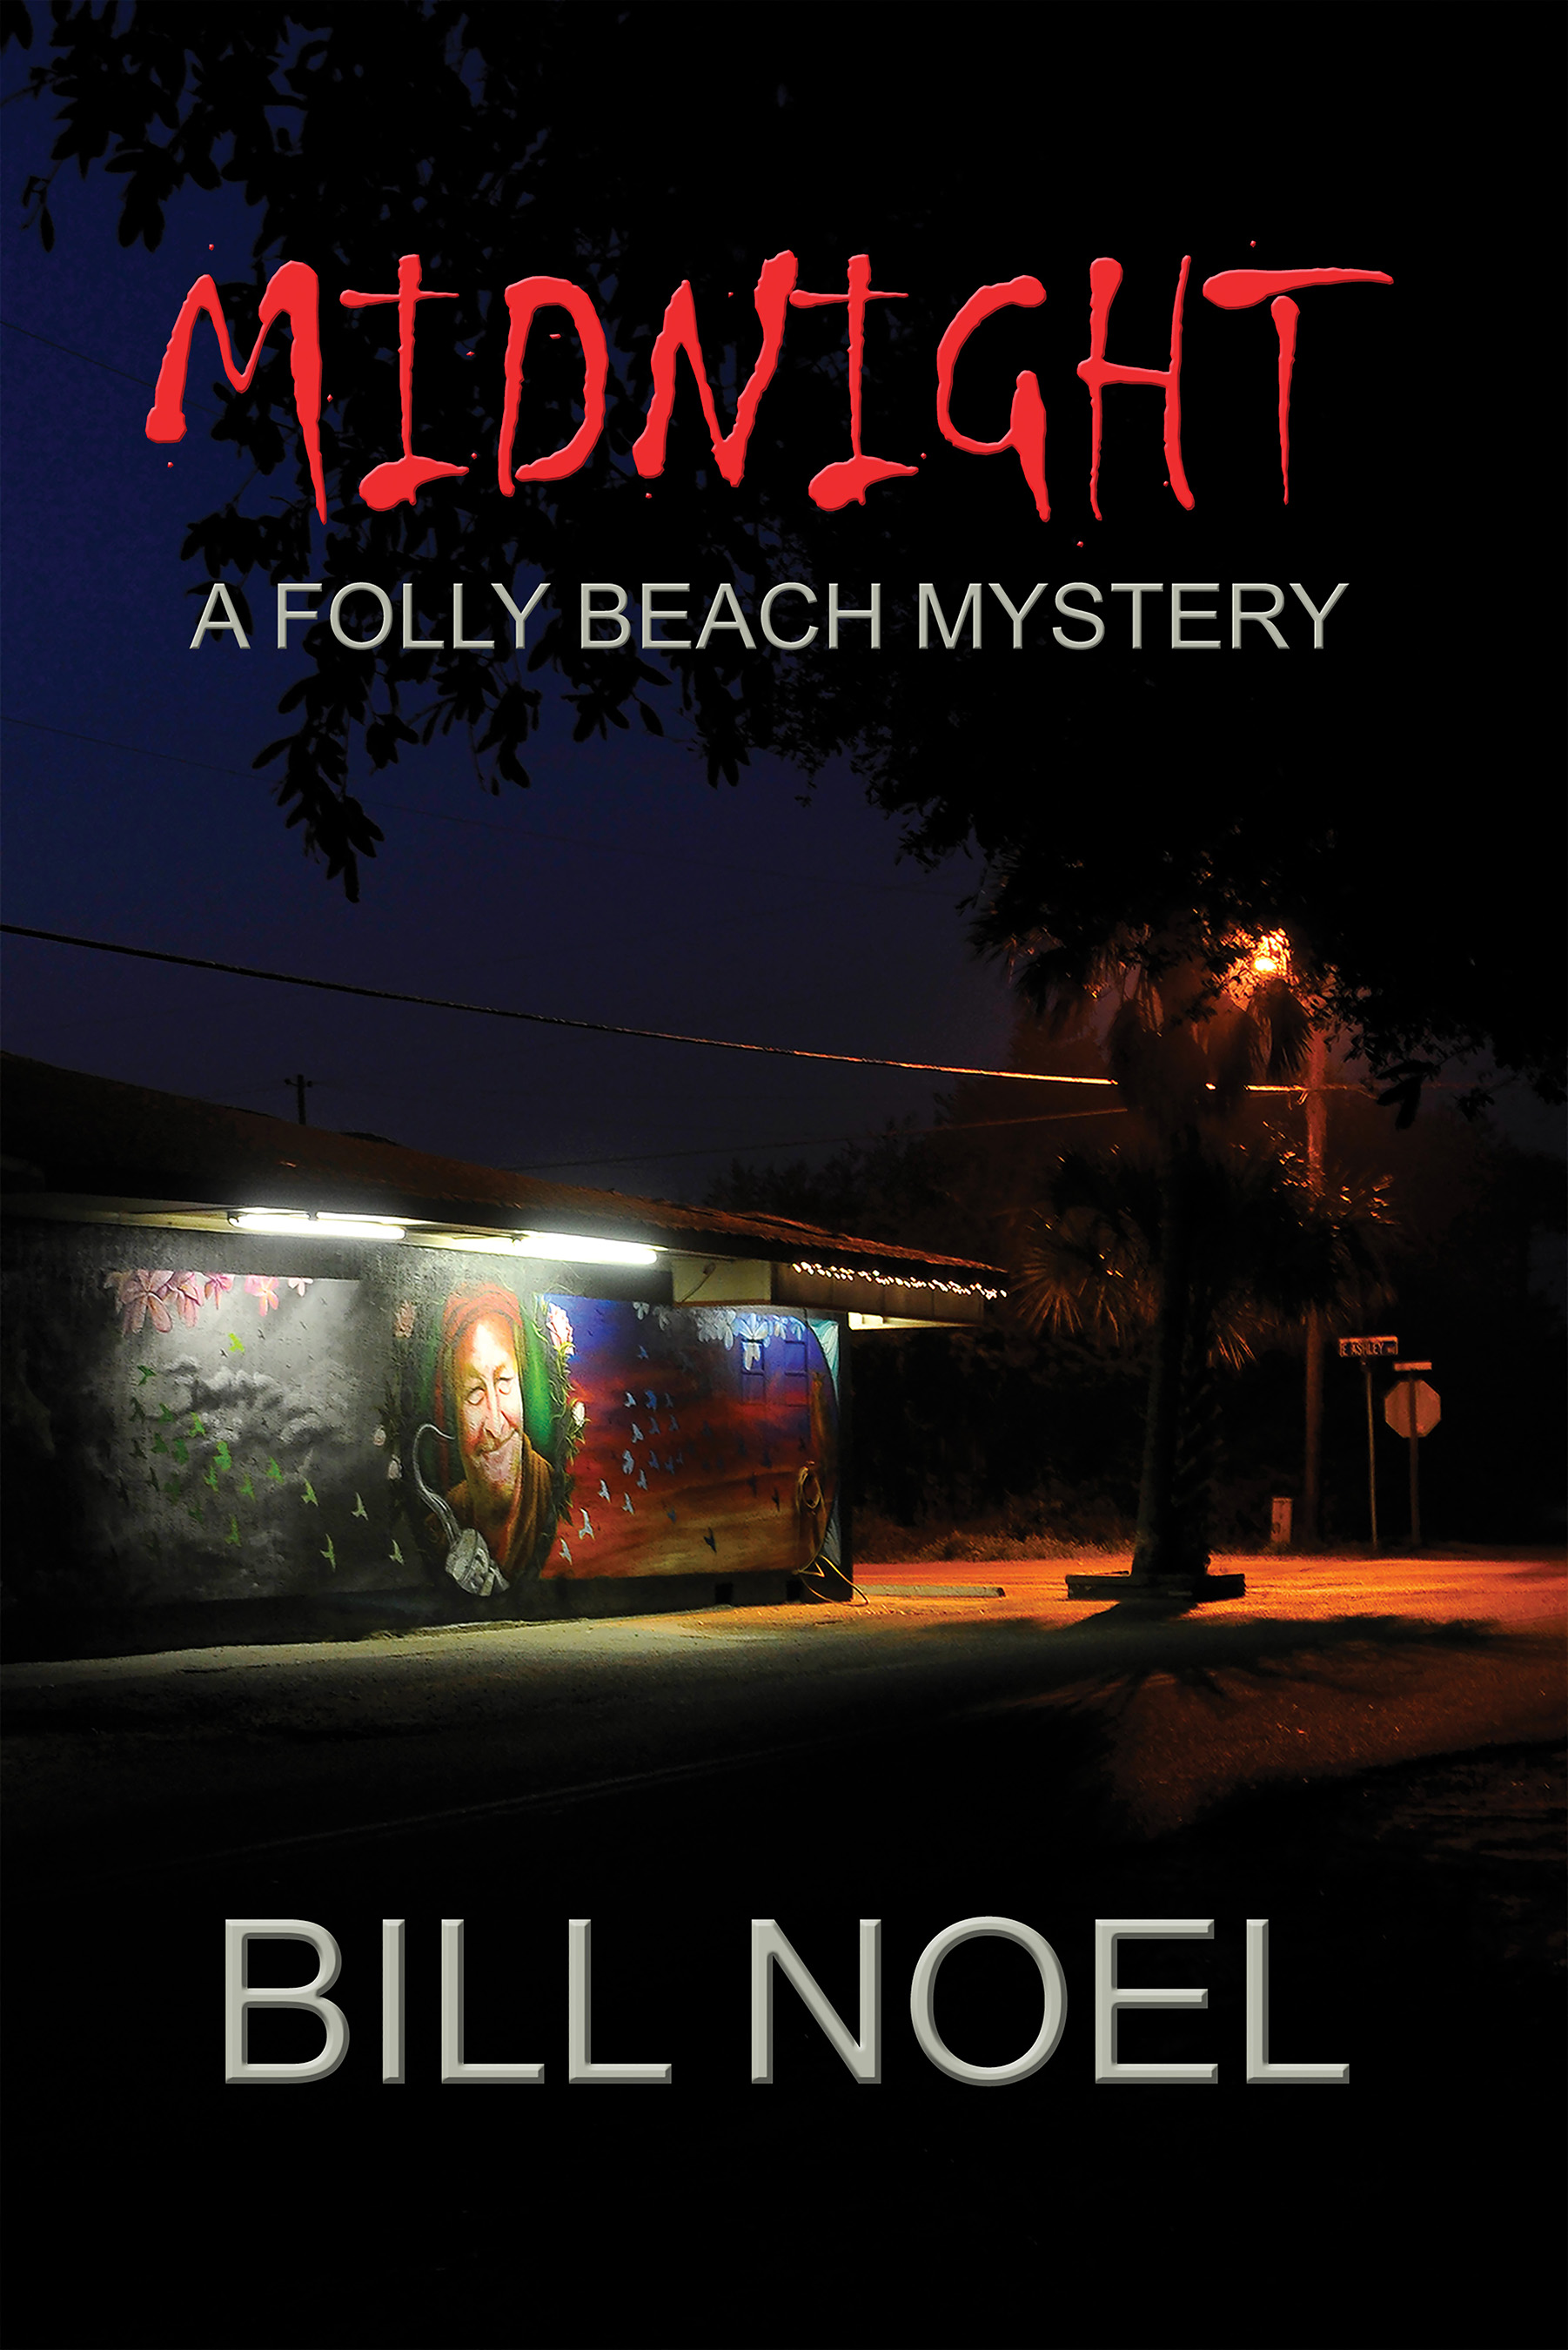 Book cover - Midnight by Bill Noel